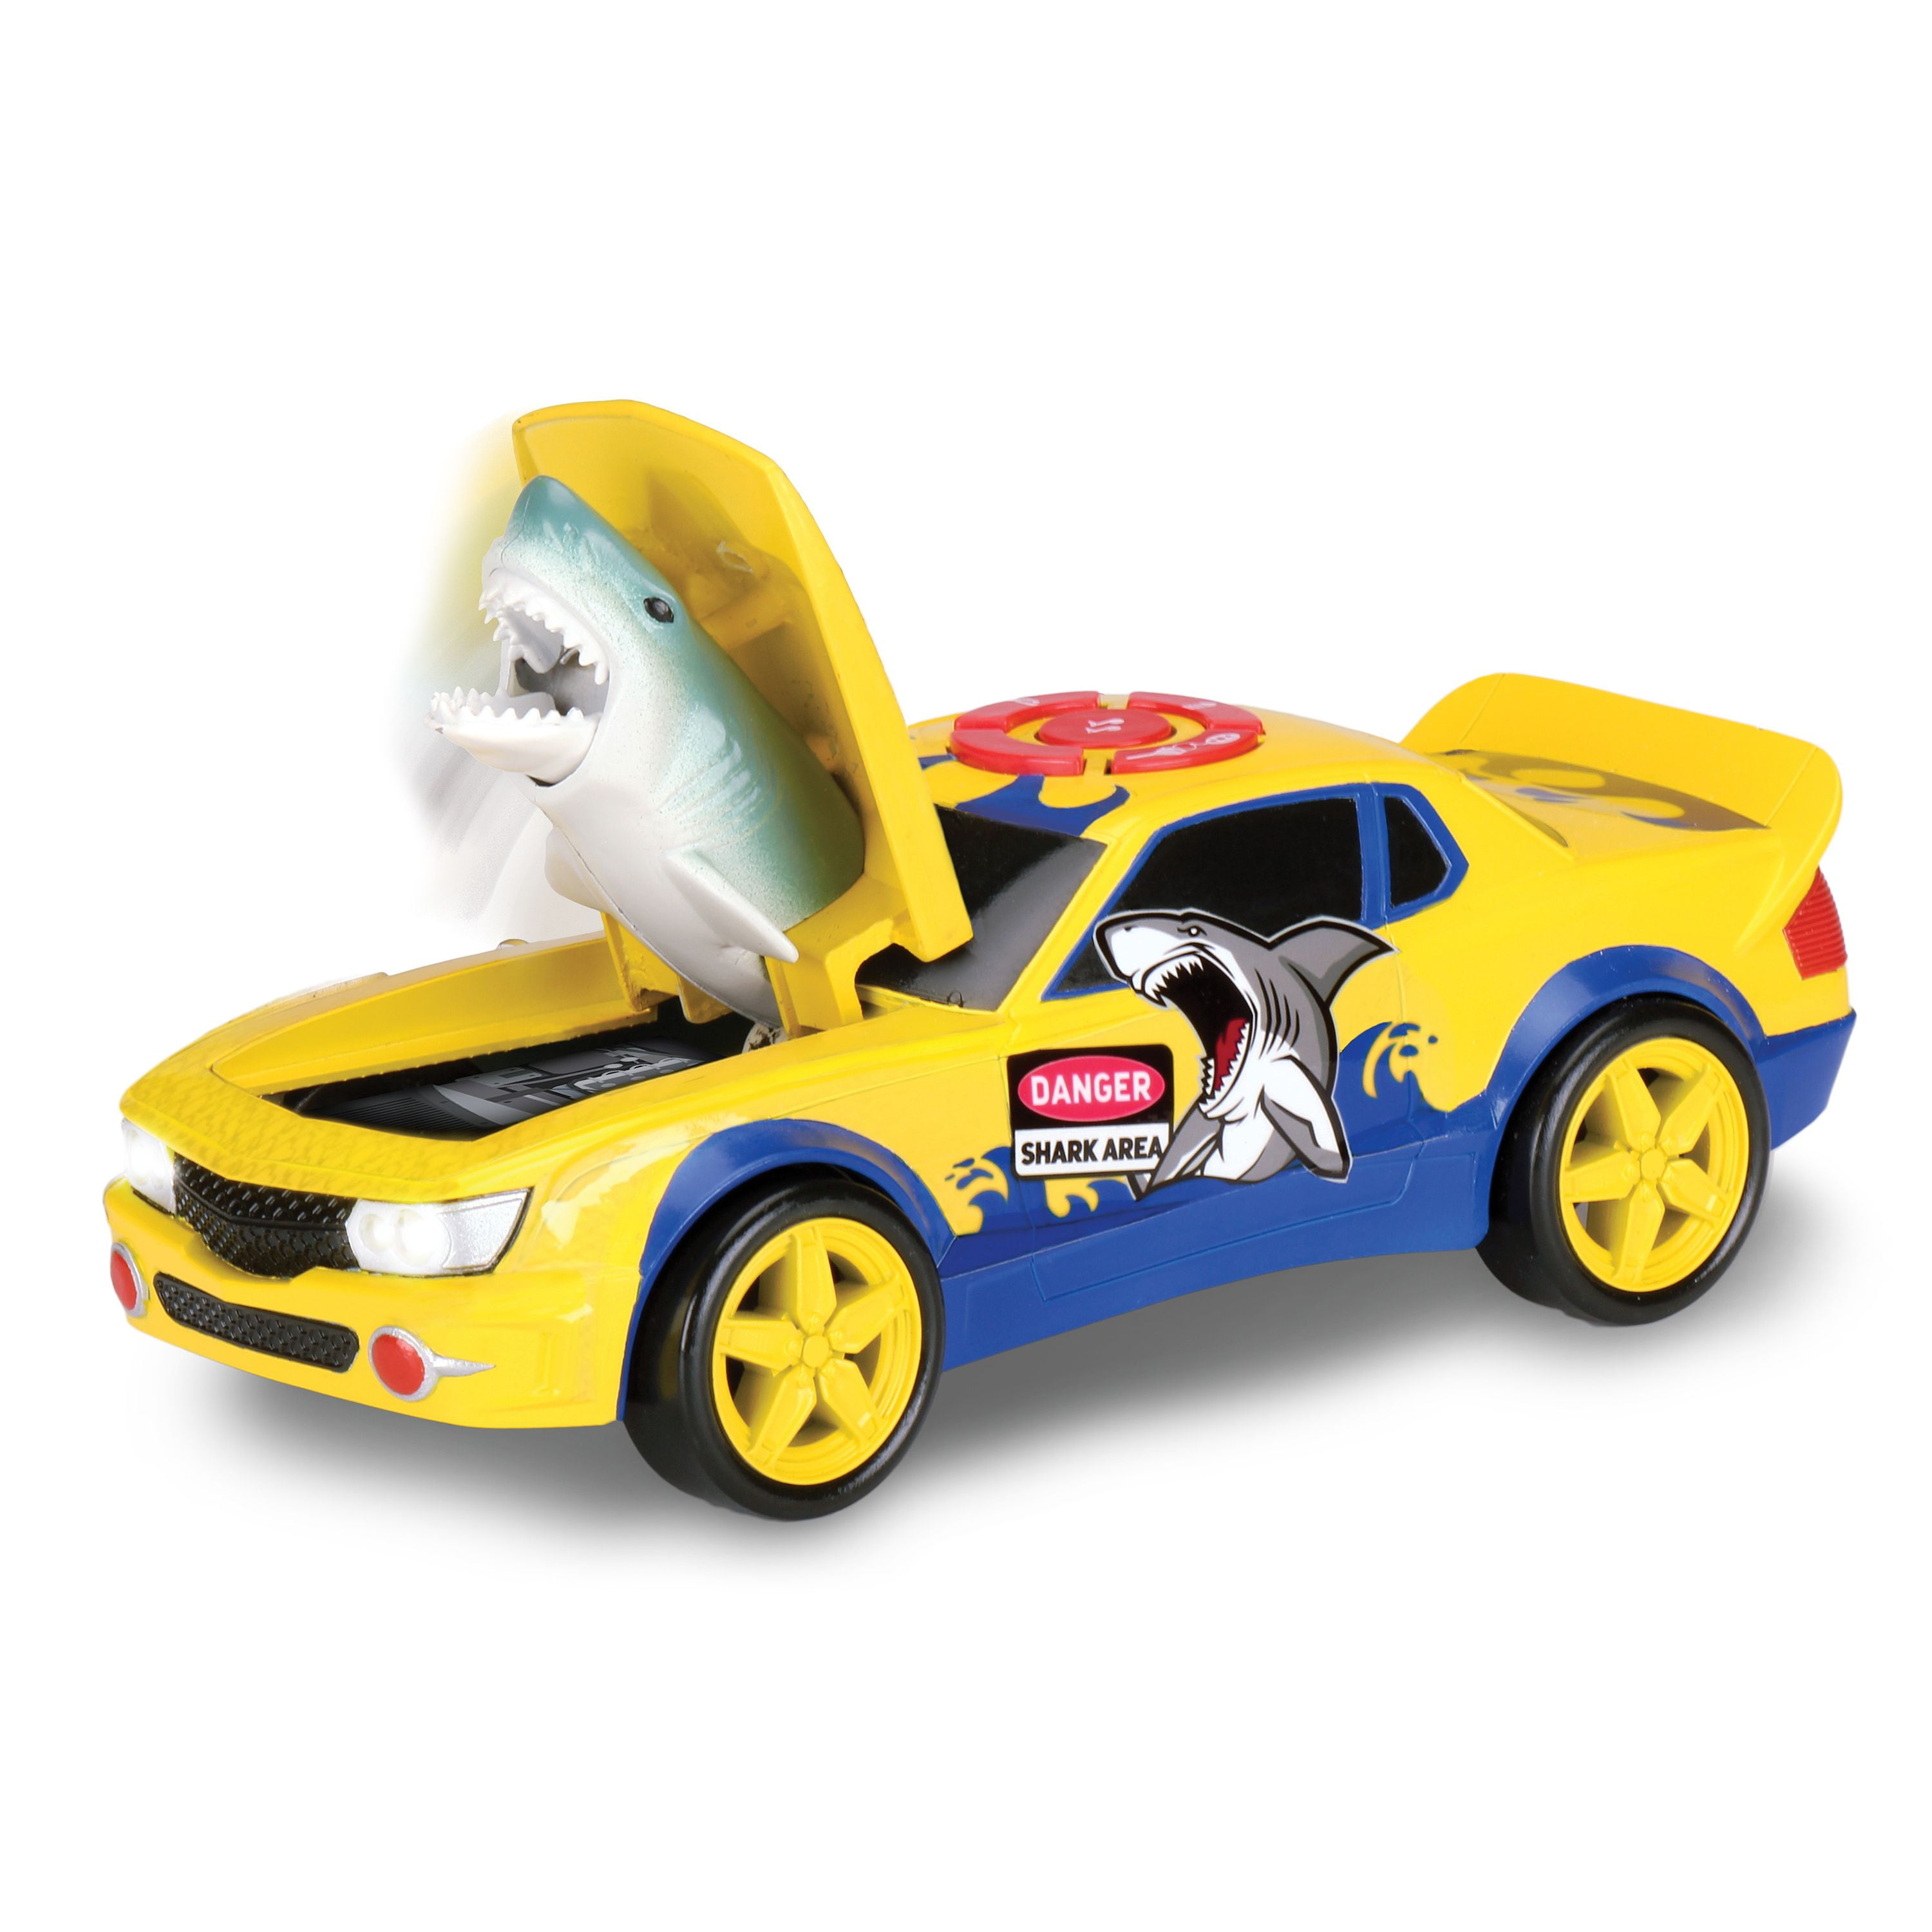 Details about   Kid Galaxy Road Rockers Motorized Dino Surprise Car with Sound Brand New Toy